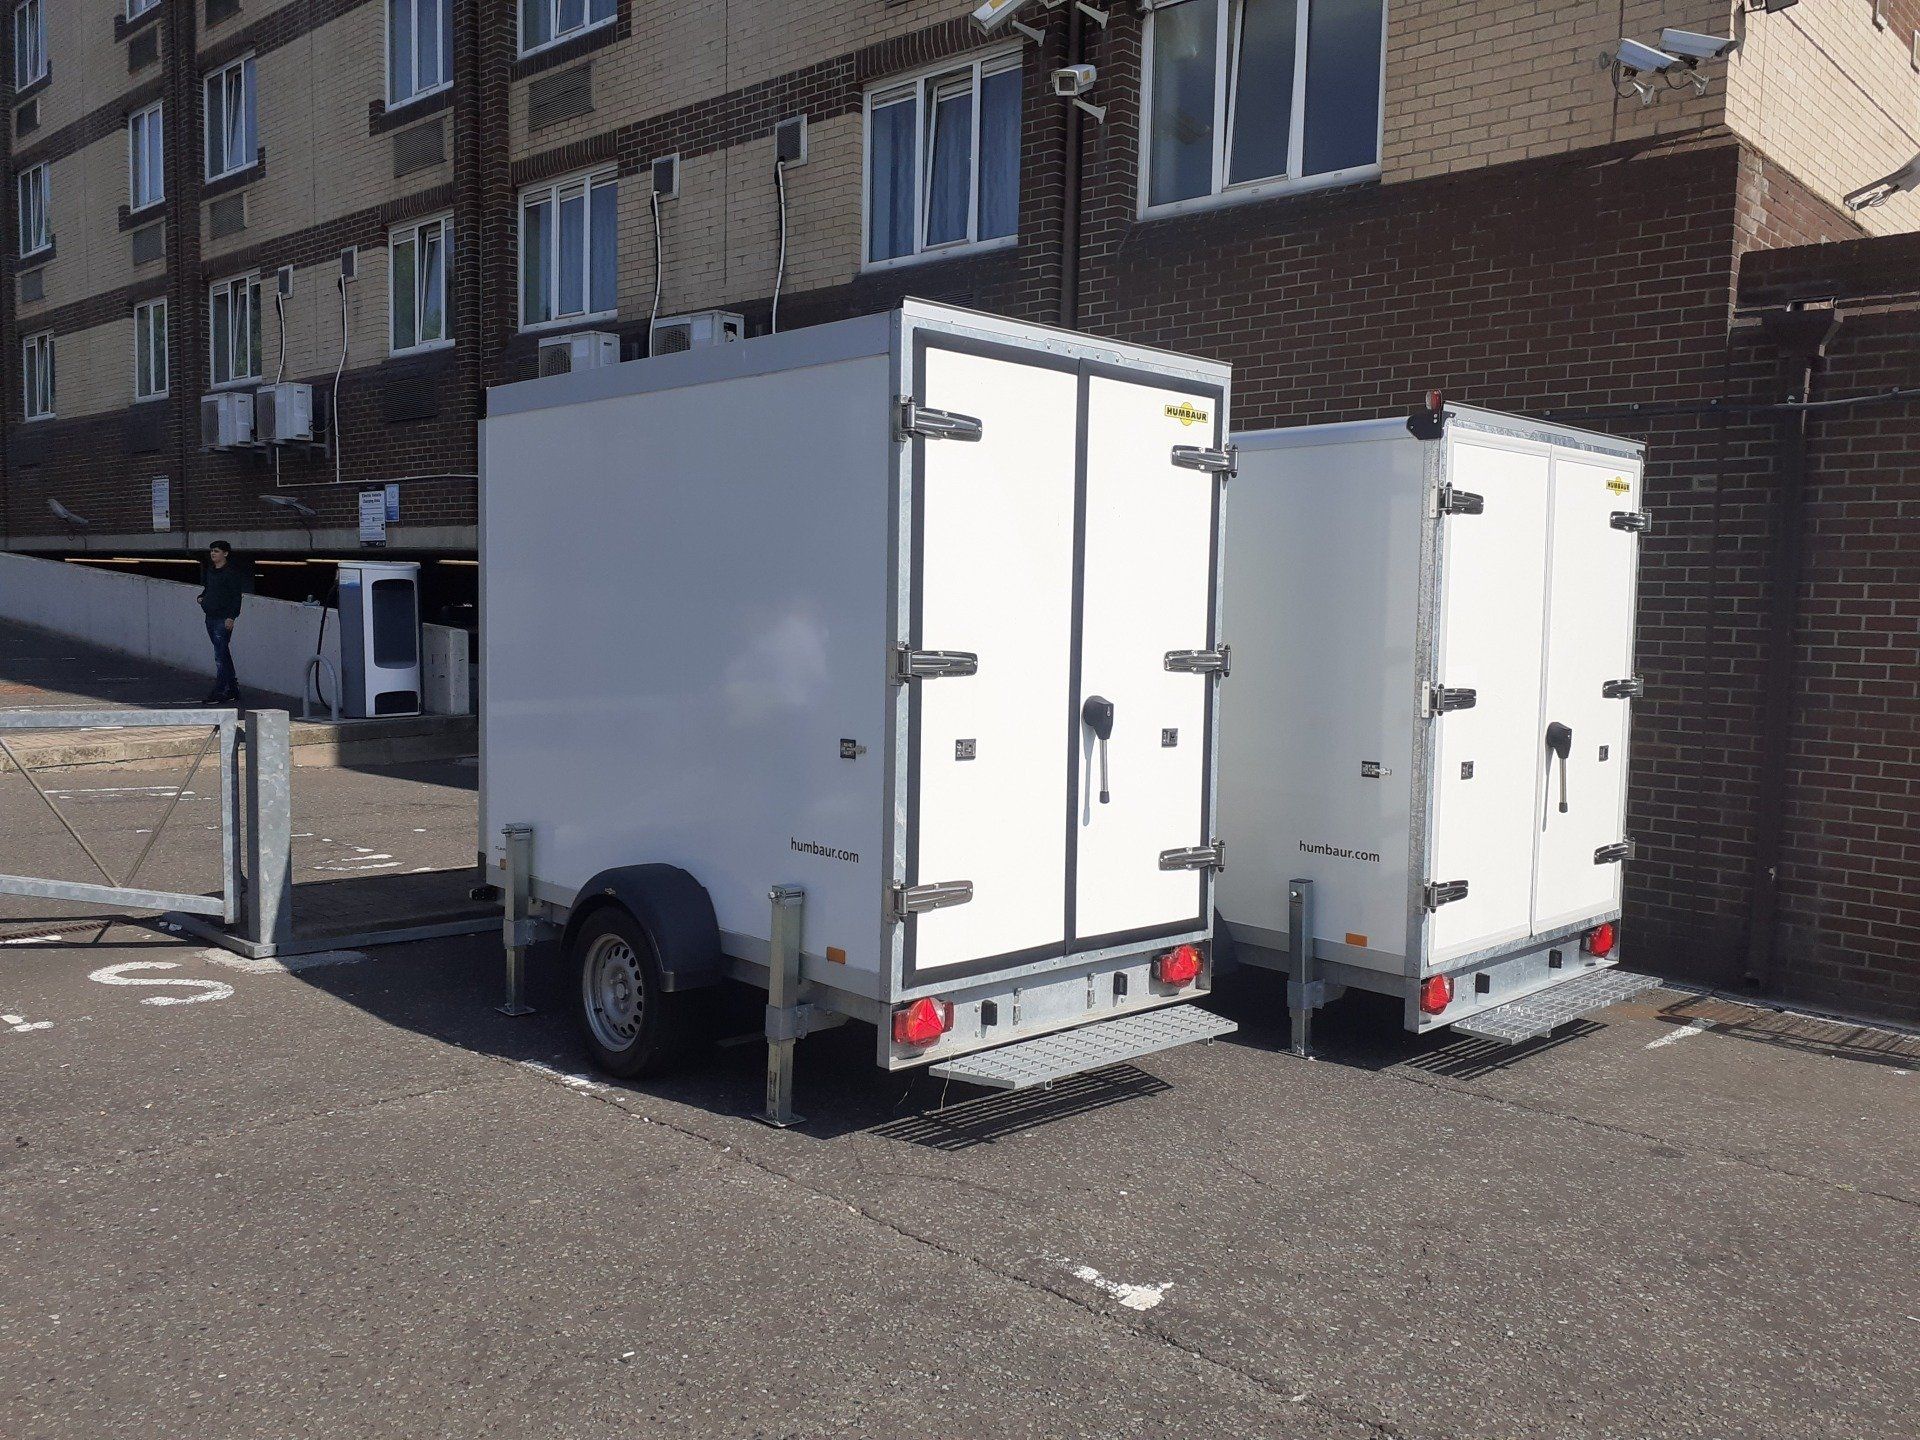 two refrigerated trailers parked outside a hotel